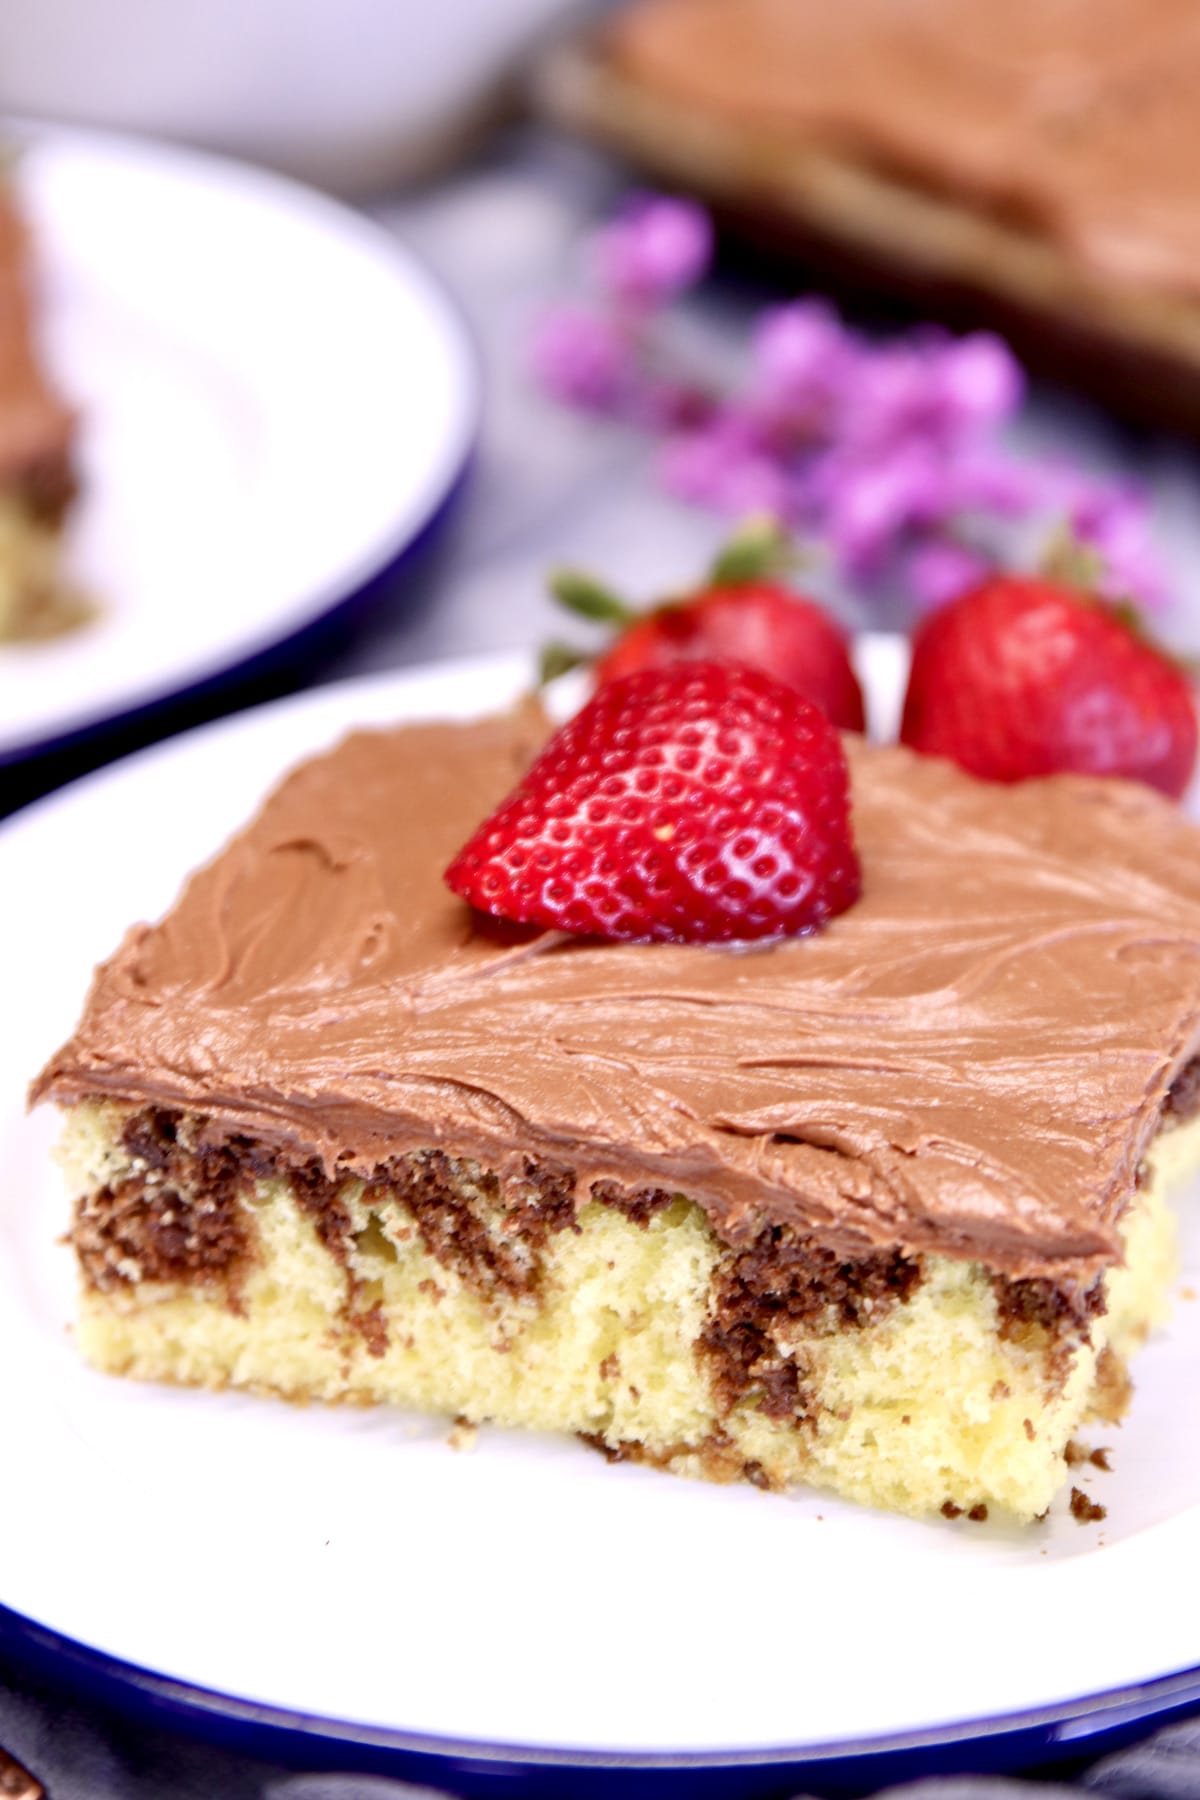 Marble Sheet Cake slice with chocolate icing and half strawberry.